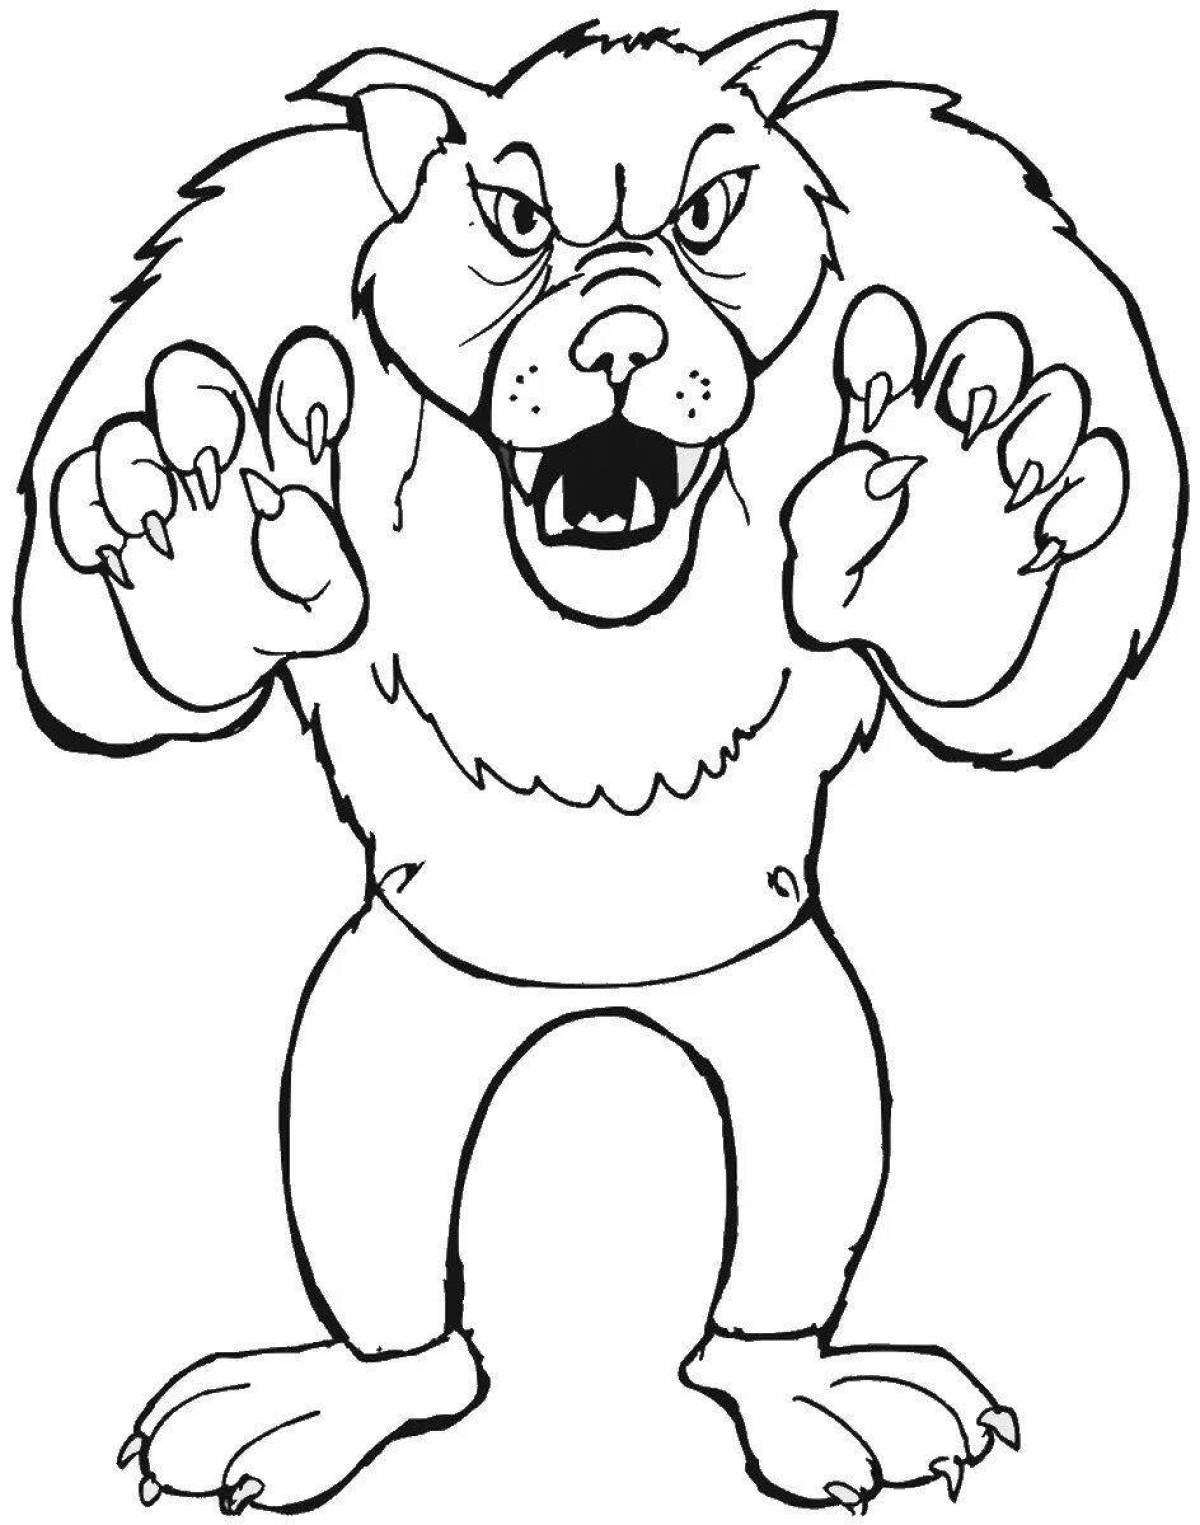 Chilling bad wolf coloring page